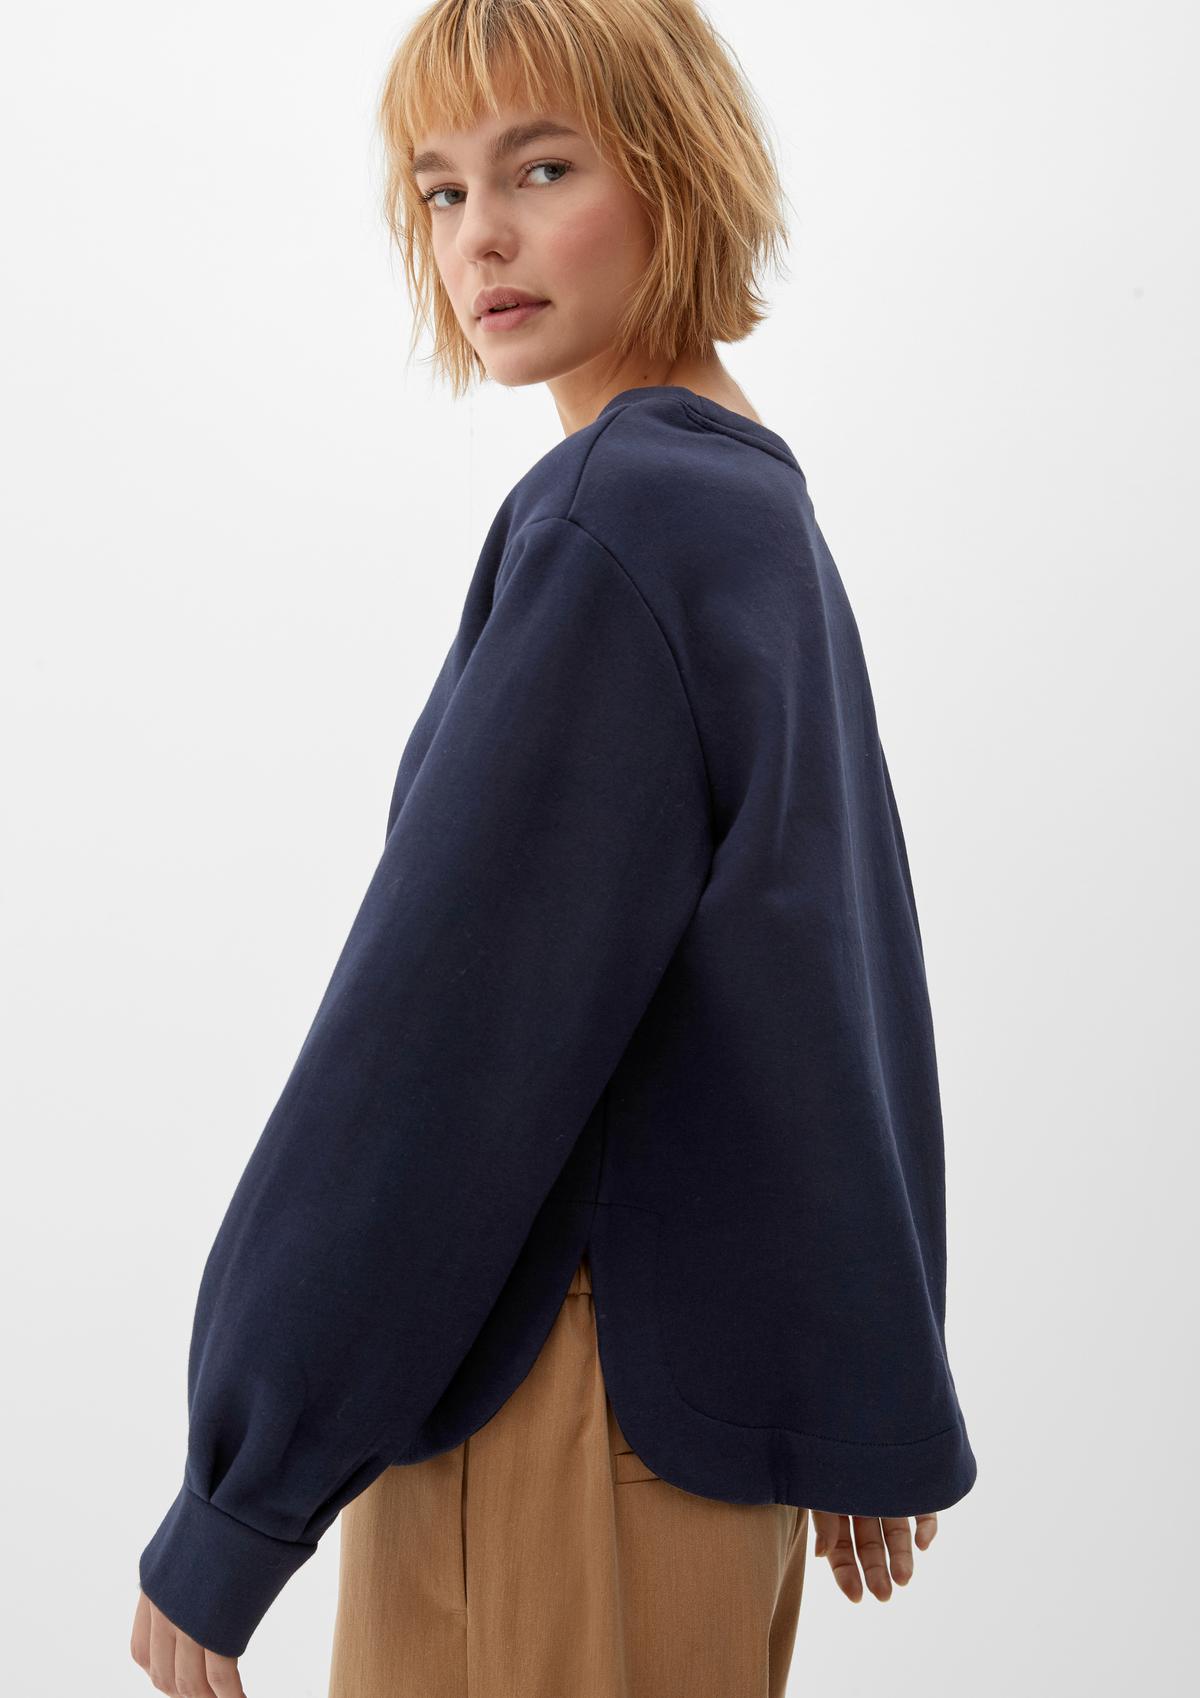 Sweatshirt with a rounded hem